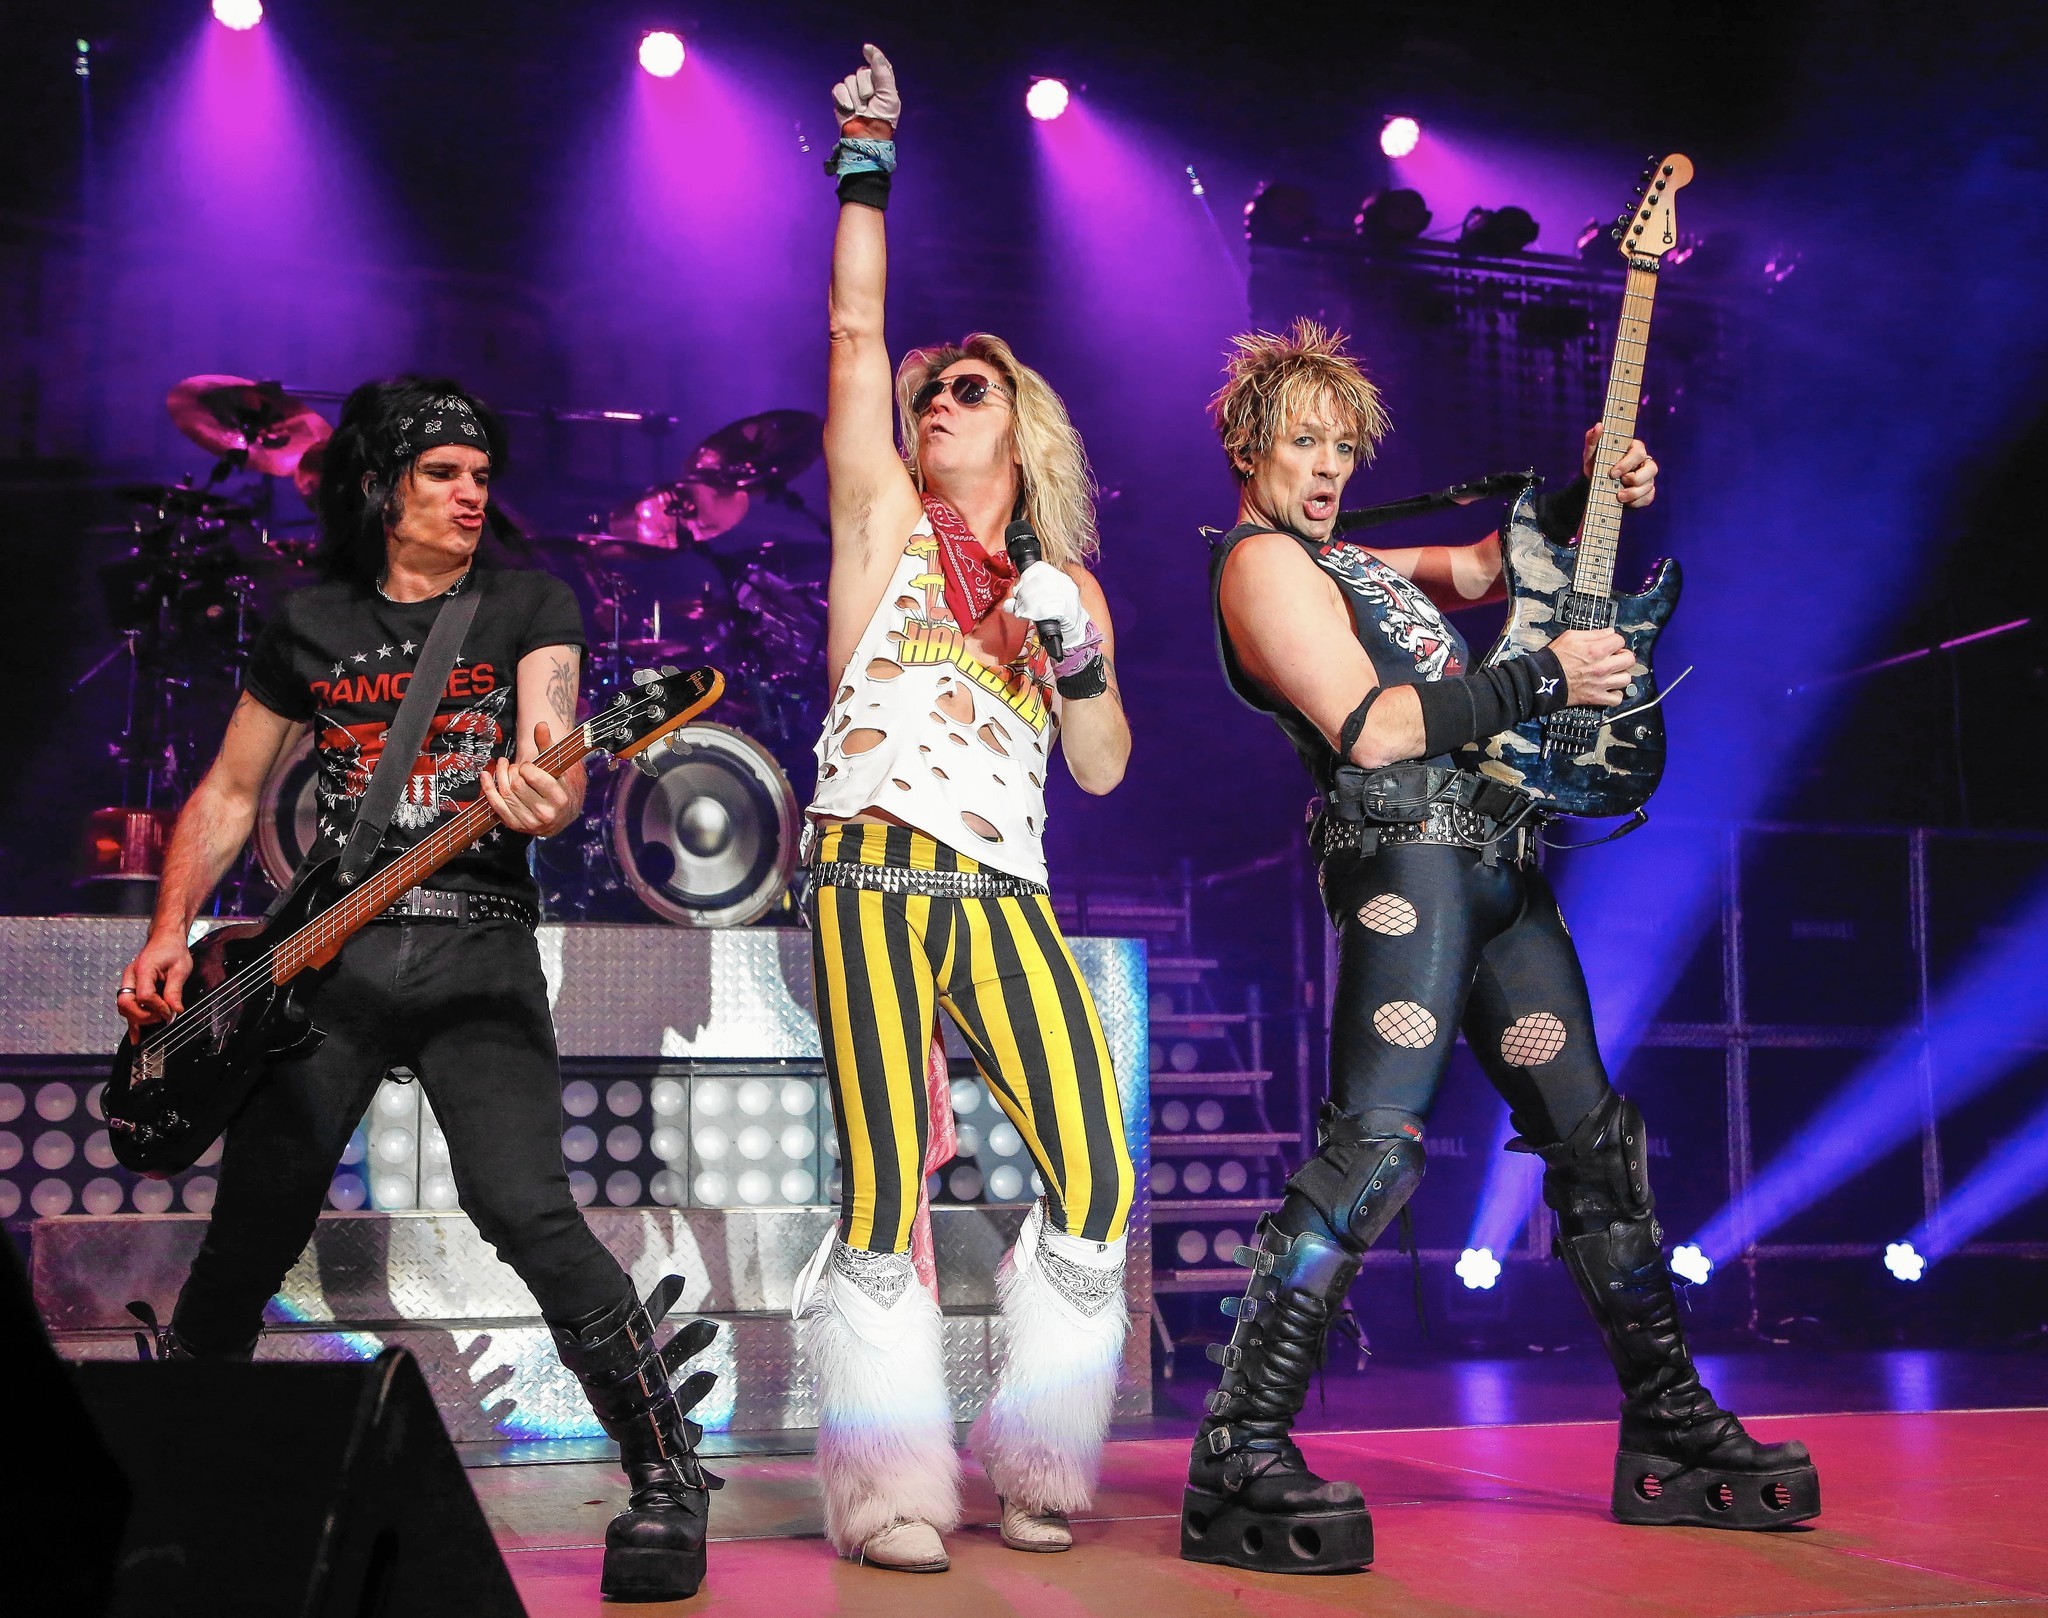 'Hairball' to pay homage to famed arena rock bands of 1980s - Daily Southtown